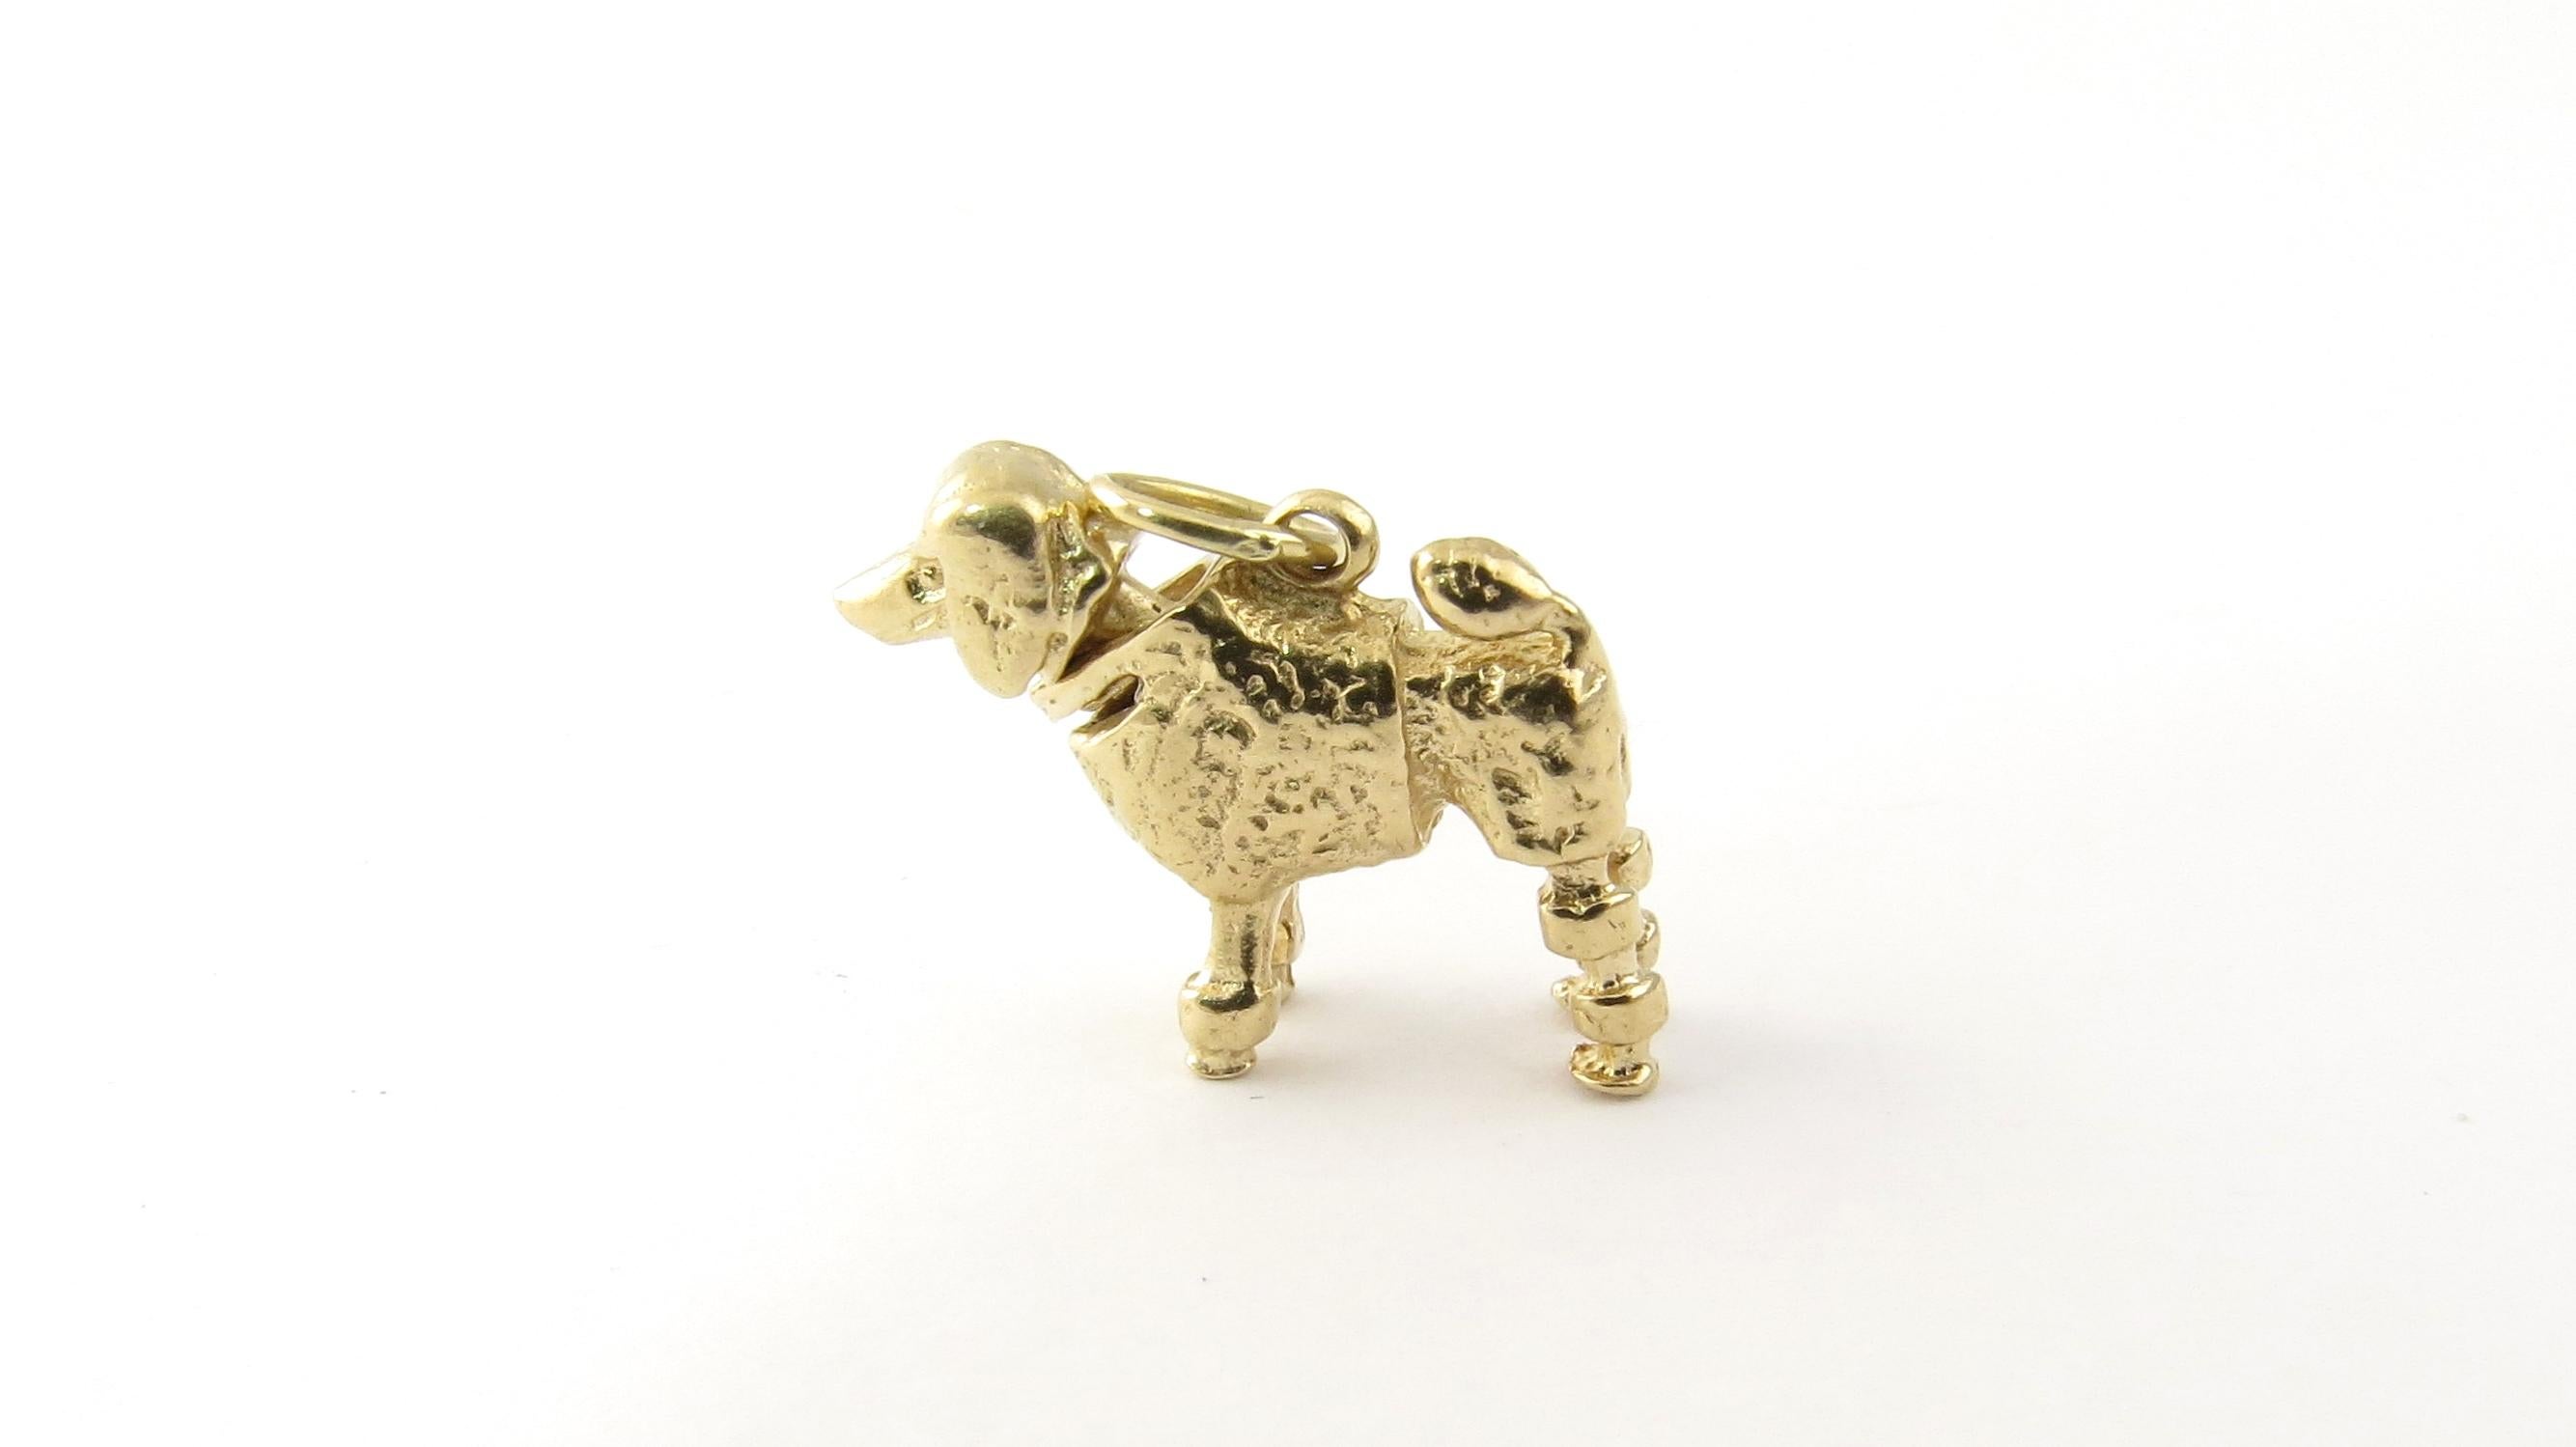 Vintage 14 Karat Yellow Gold Bobble Head Poodle Charm.

The intelligent and loyal poodle is one of the most popular dog breeds in the United States.

This lovely bobble head charm features the beloved poodle meticulously detailed in 14K gold.

Size: